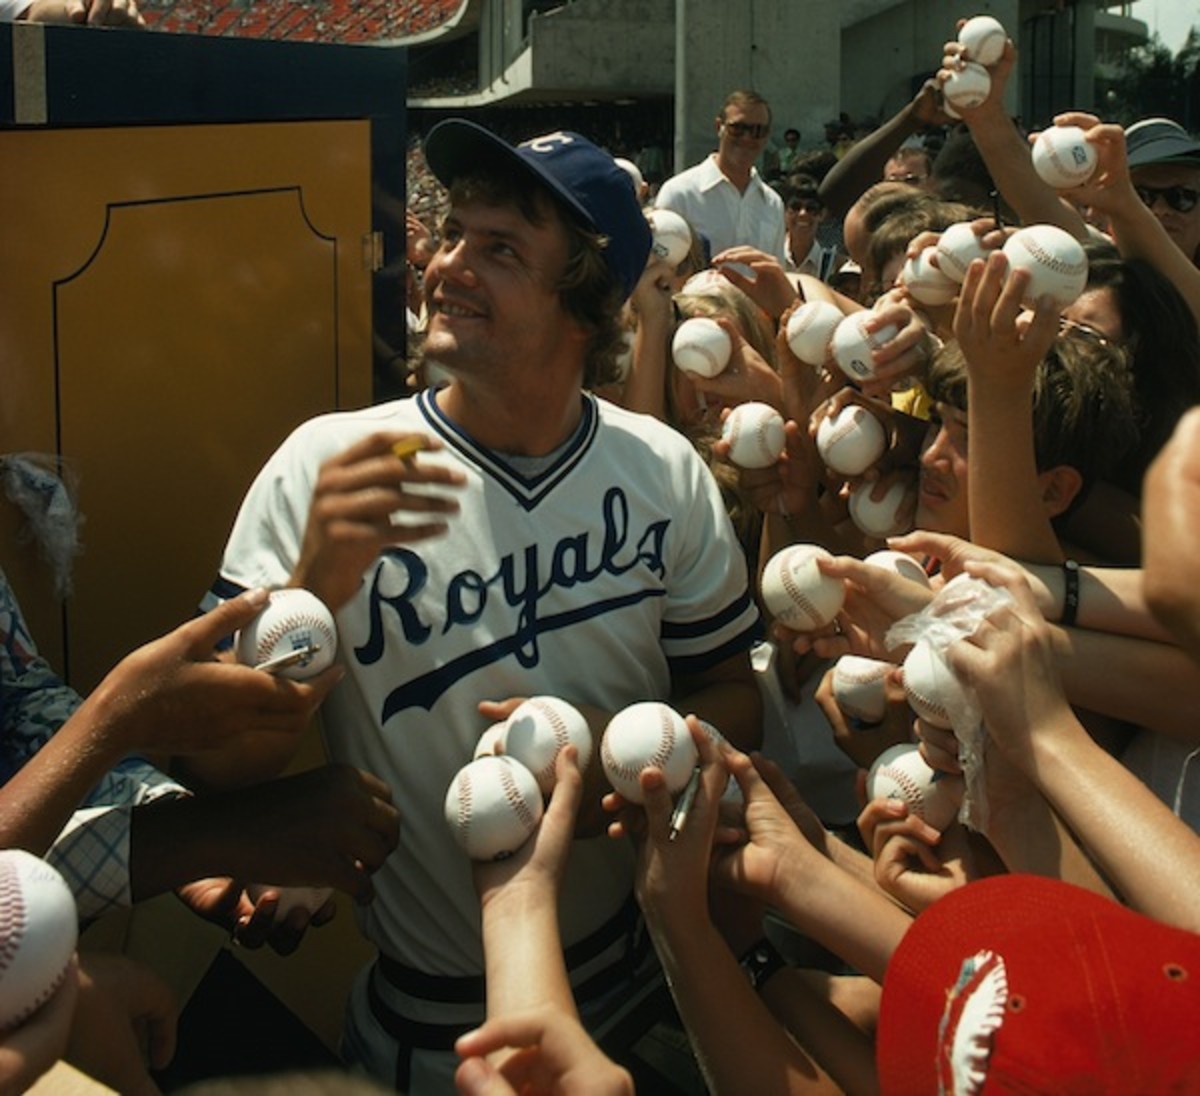 Young fans hold up baseballs for Royals star George Brett to sign